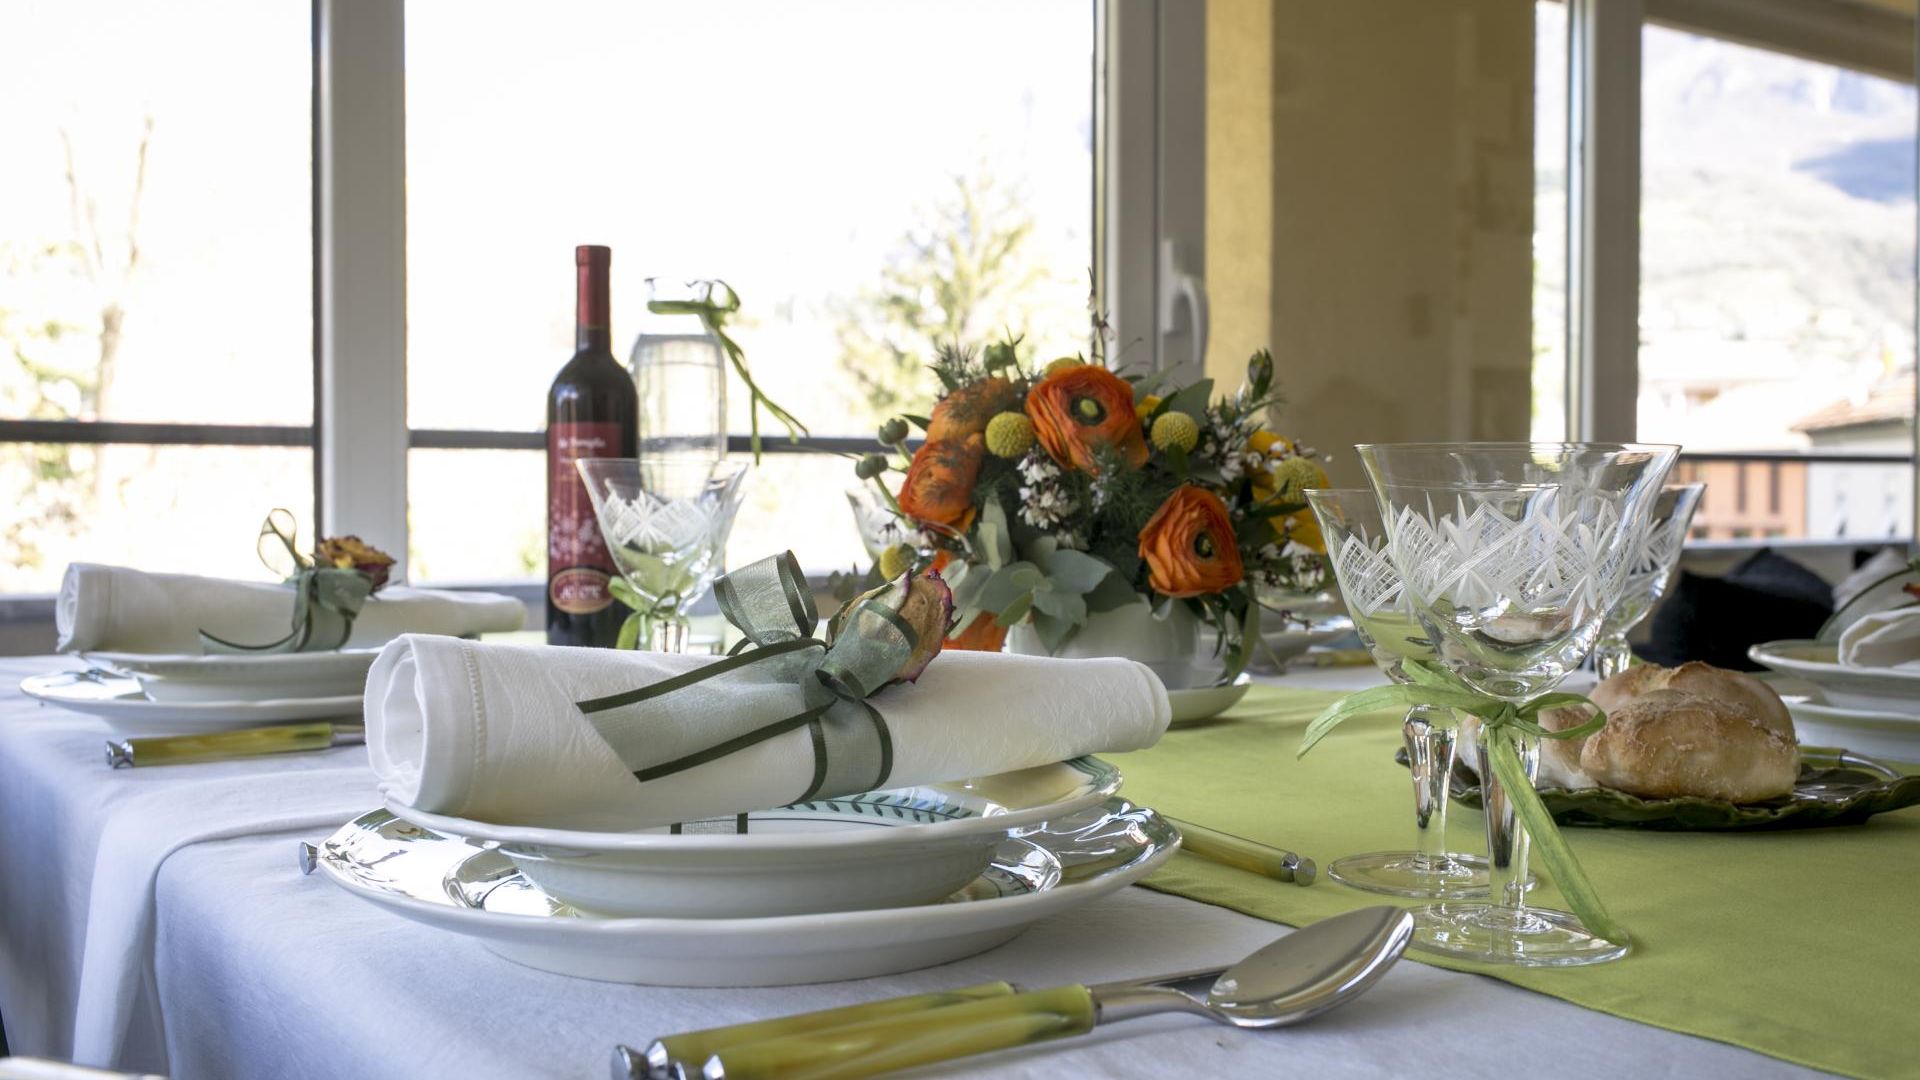 Private lunch or dinner with an Italian family with cooking demo and wines included in Bergamo